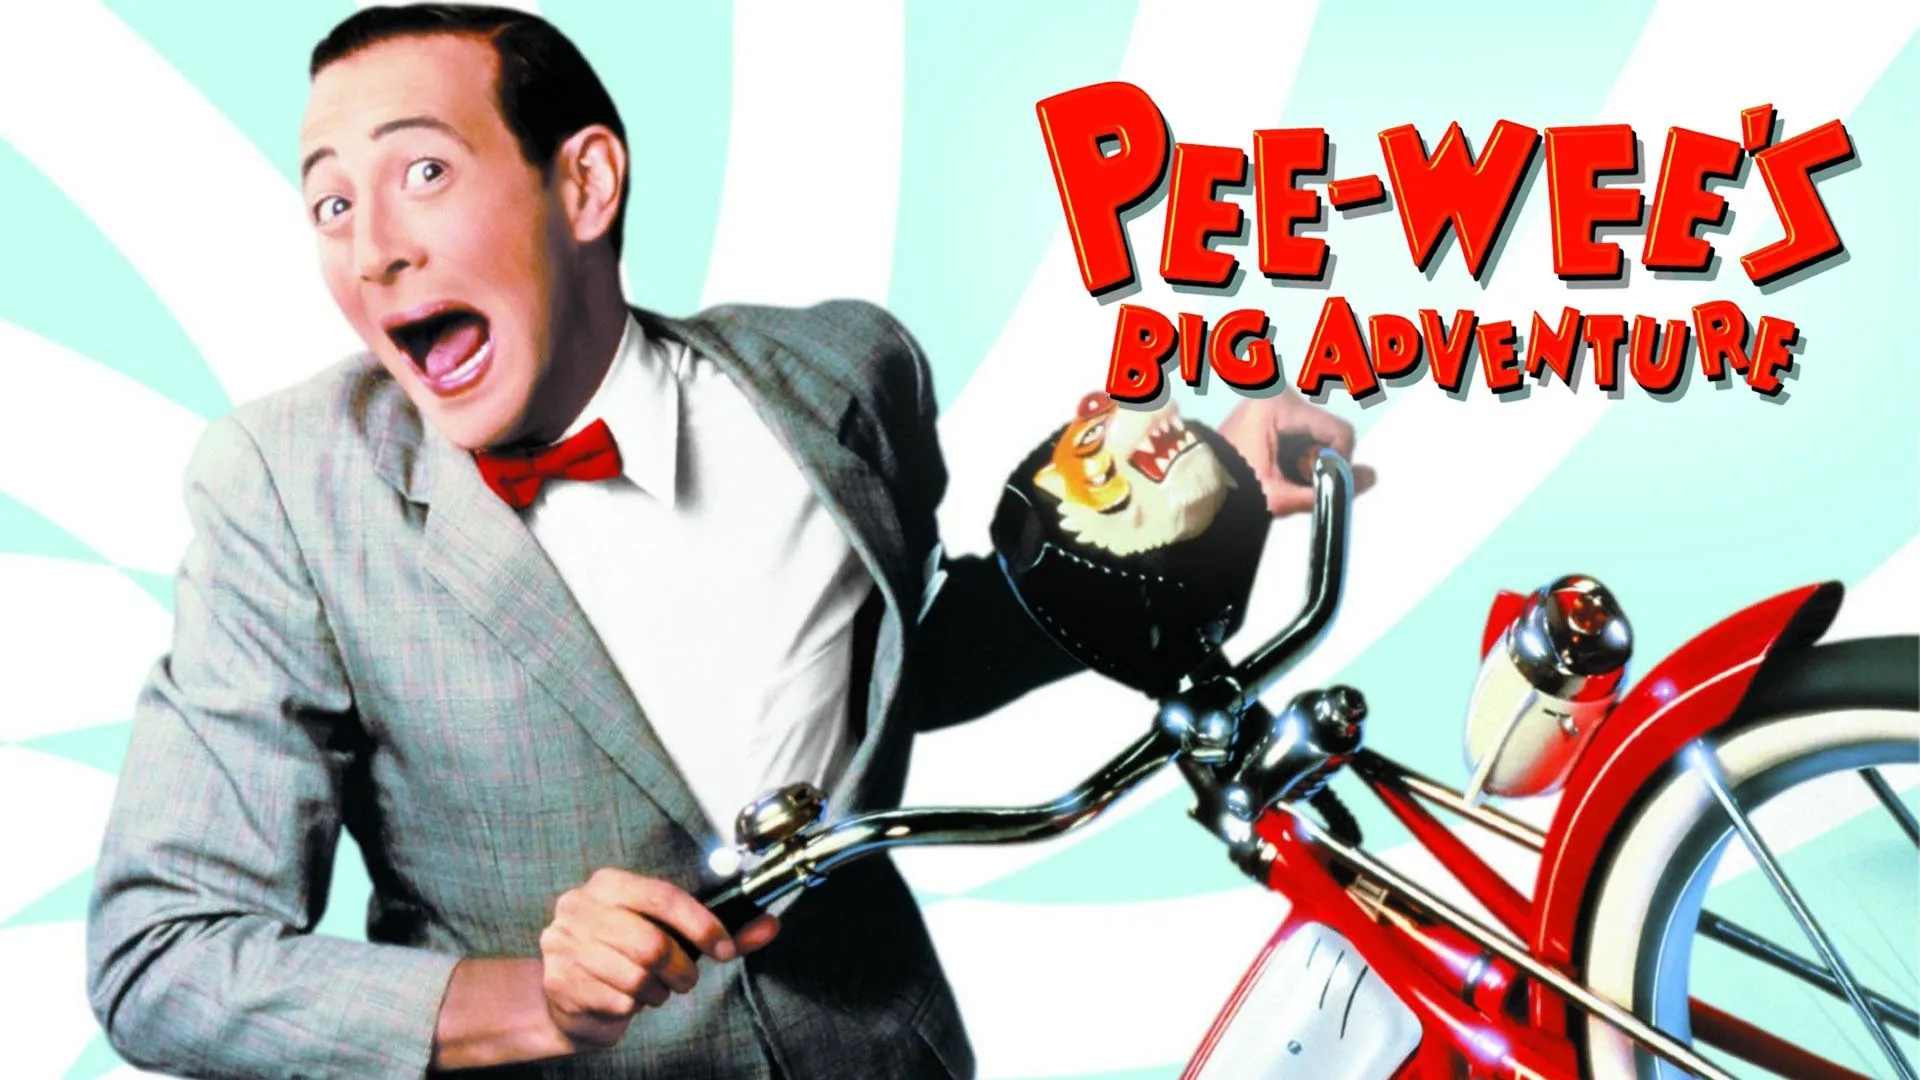 Television Success and "Pee-Wee's Big Adventure"